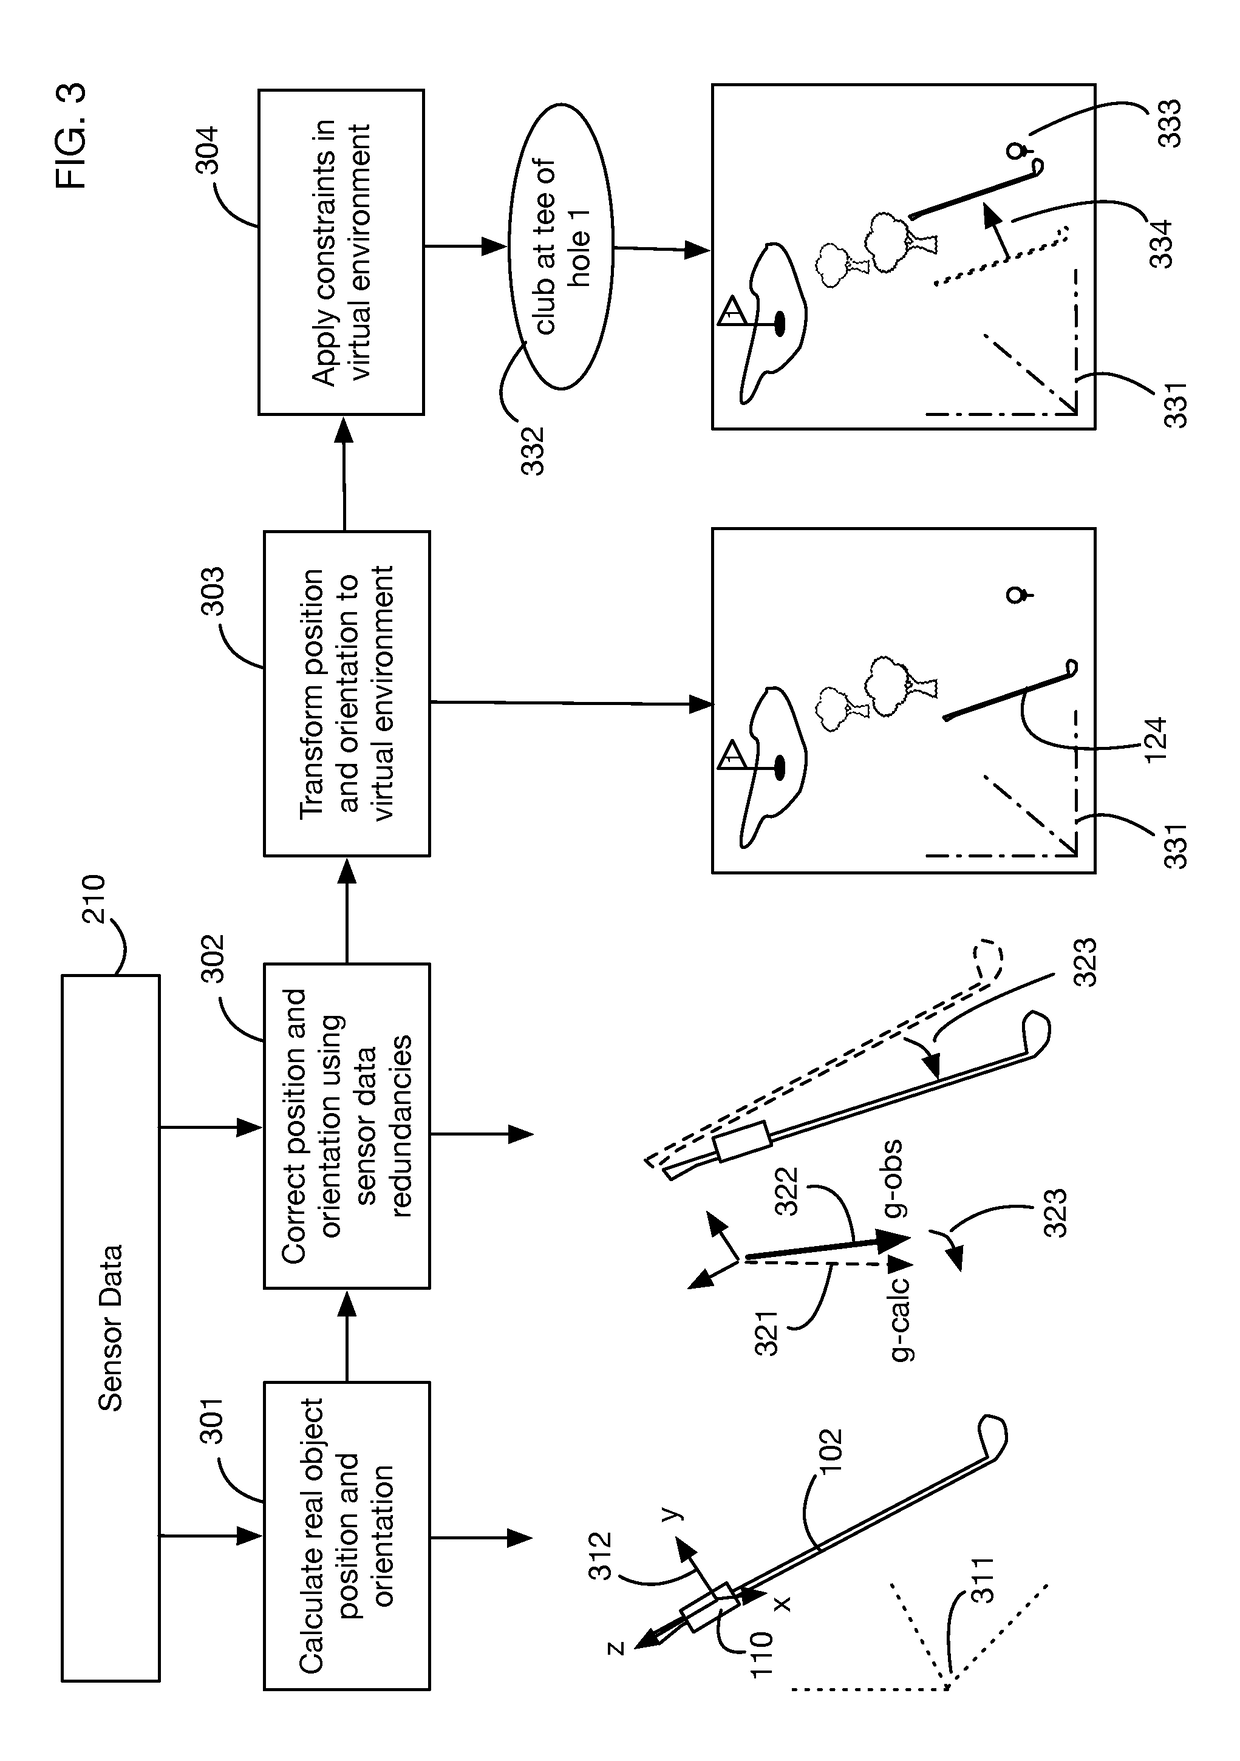 Motion mirroring system that incorporates virtual environment constraints